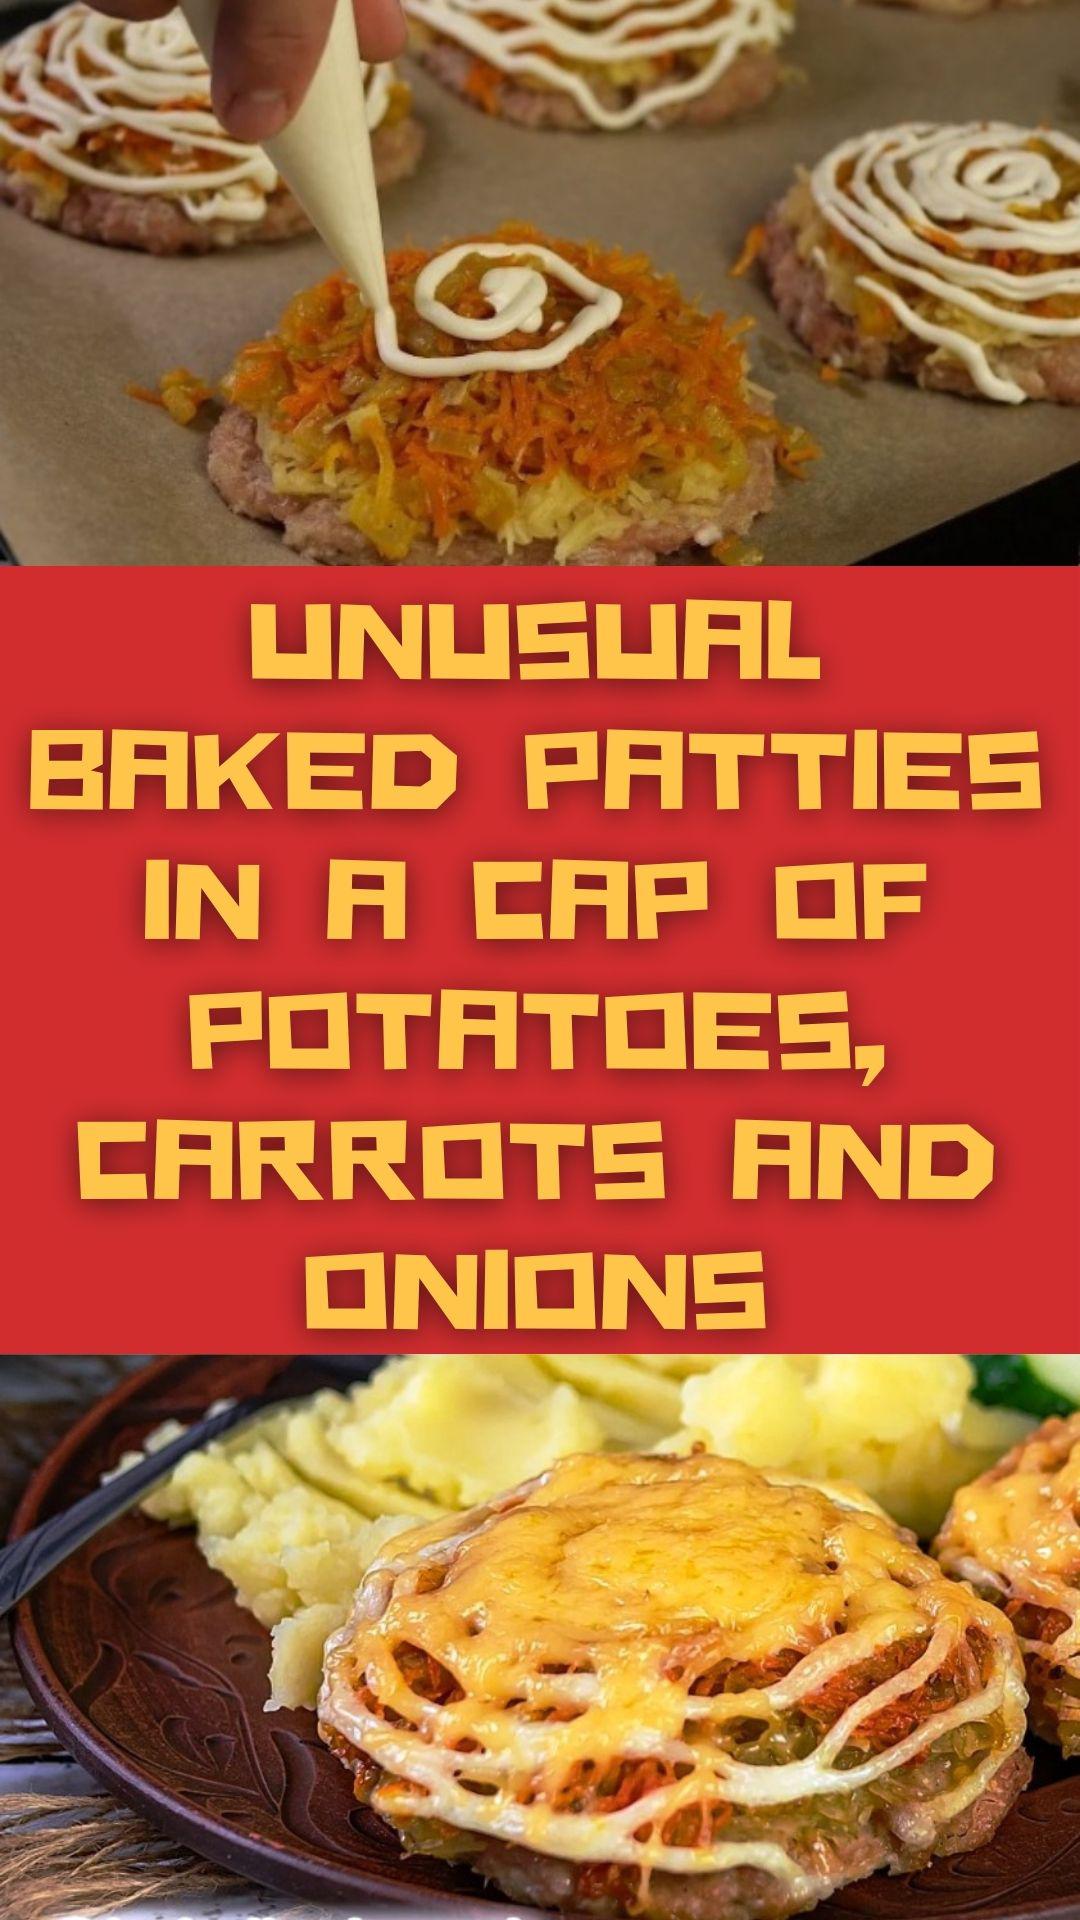 Unusual baked patties in a cap of potatoes, carrots and onions